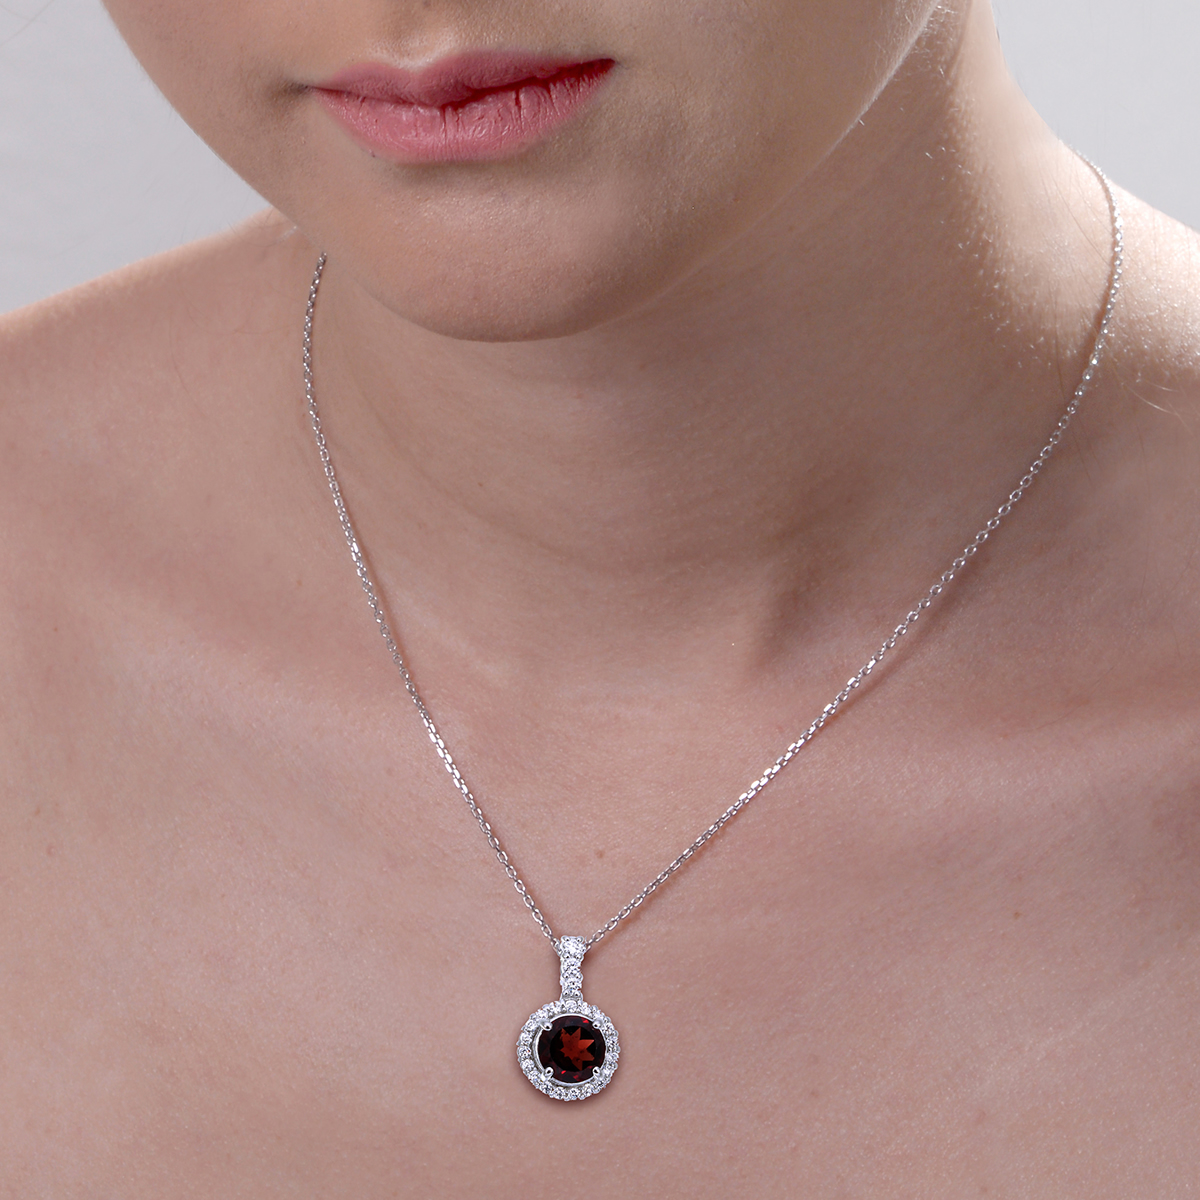 Vir Jewels 1/2 cttw Garnet Pendant Necklace .925 Sterling Silver With Rhodium 5 MM Round